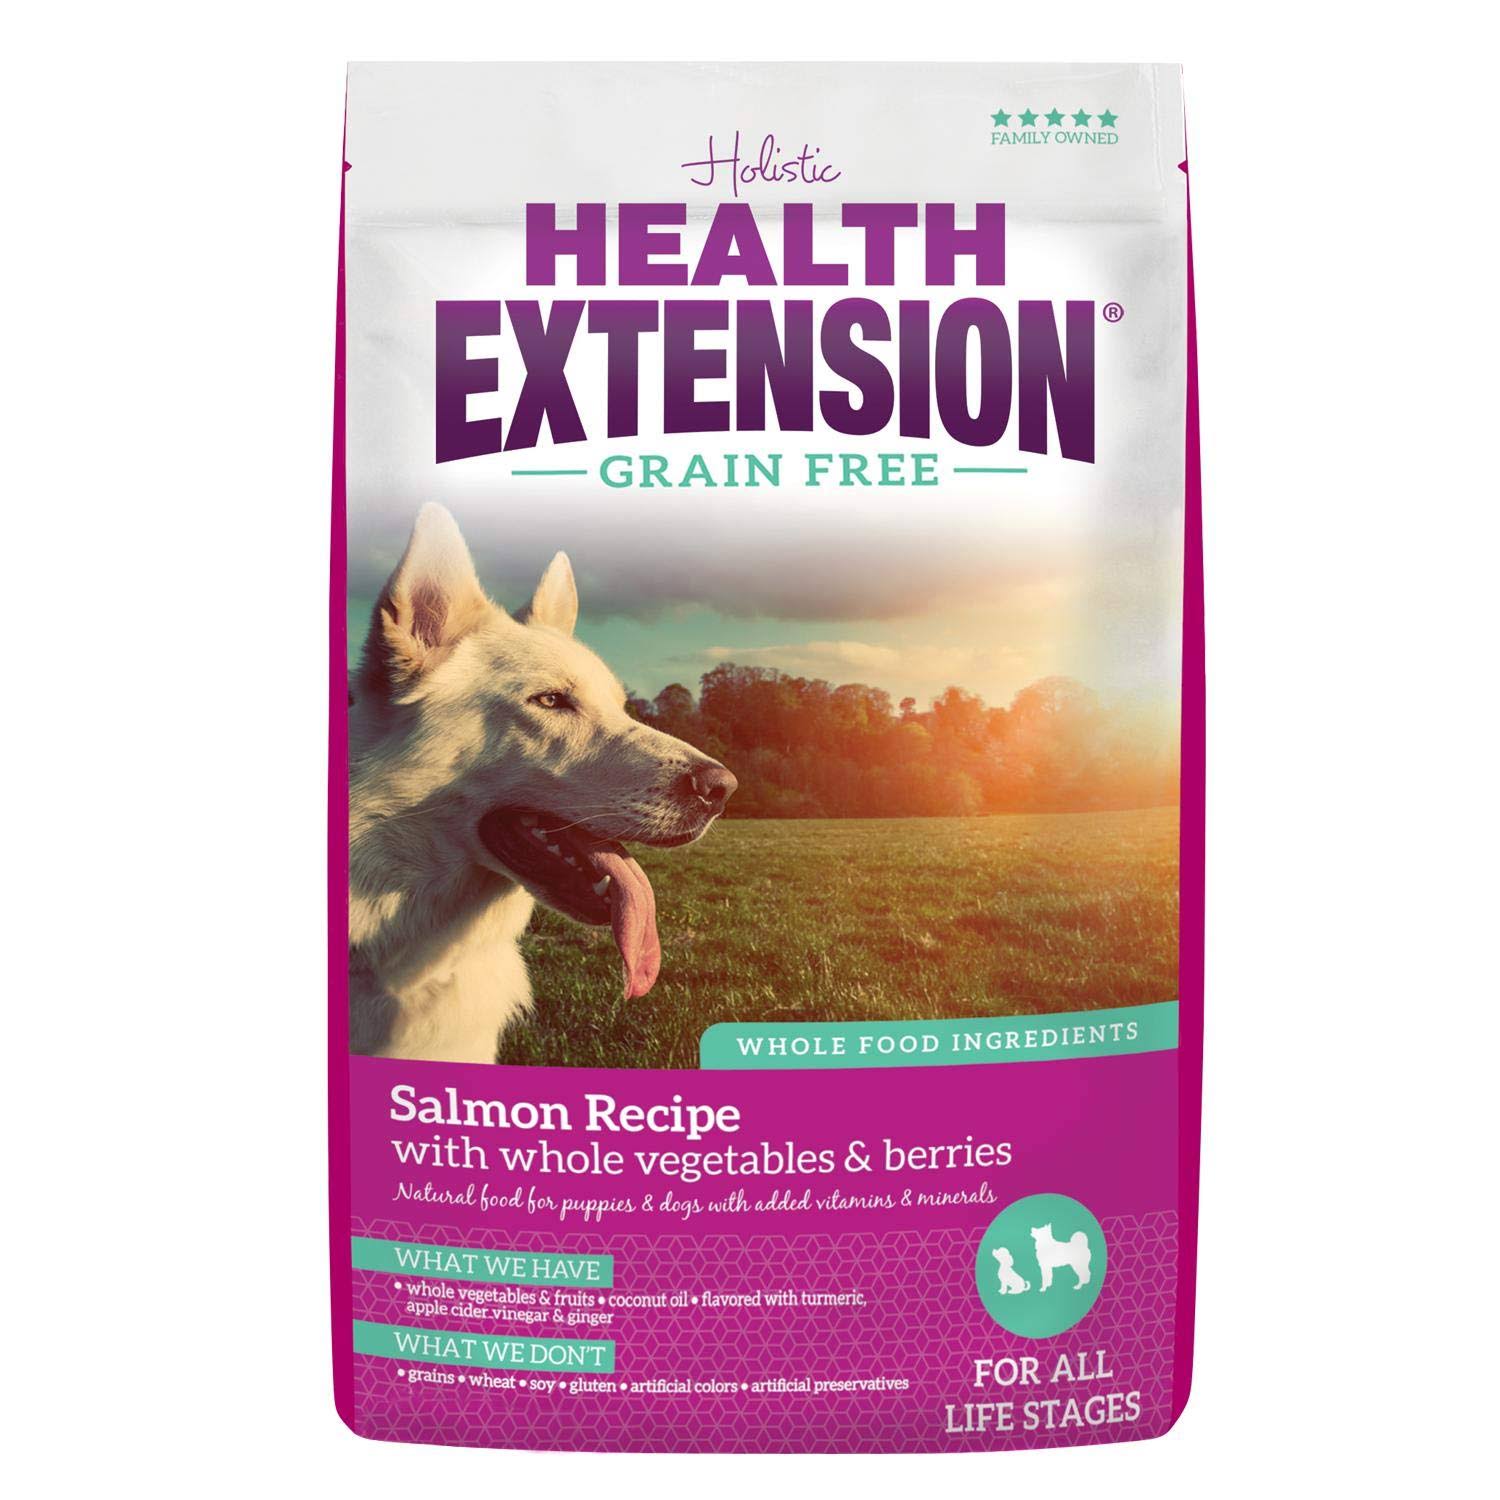 Health Extension Grain-Free Dog Food - 10lbs, Salmon Herring and Chickpea